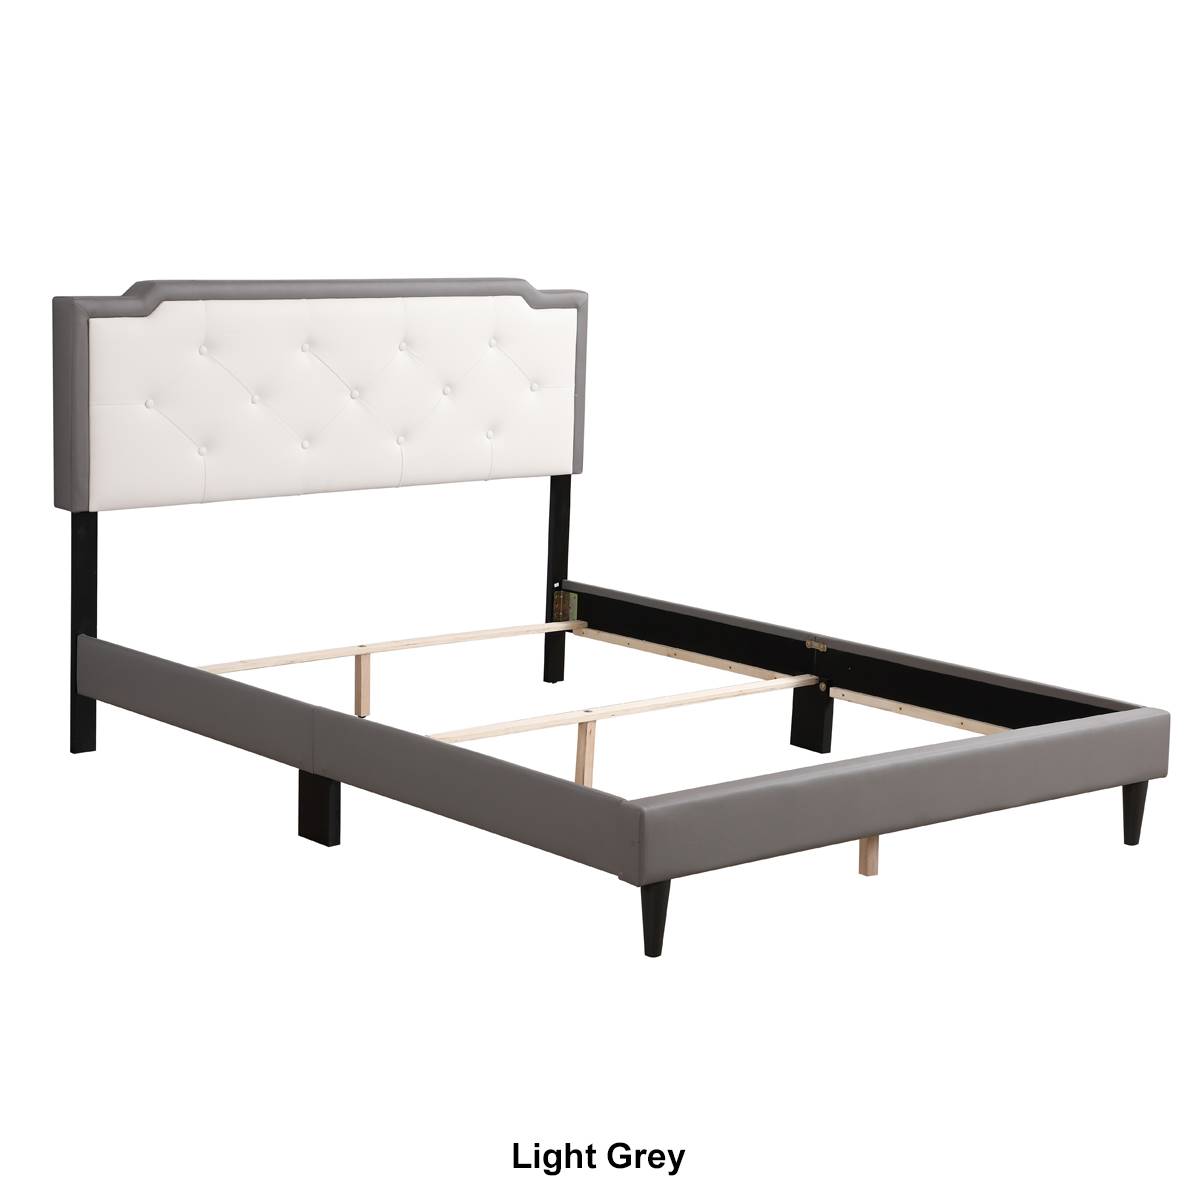 Passion Furniture Deb Jewel Tufted Panel Bed Frame - Queen